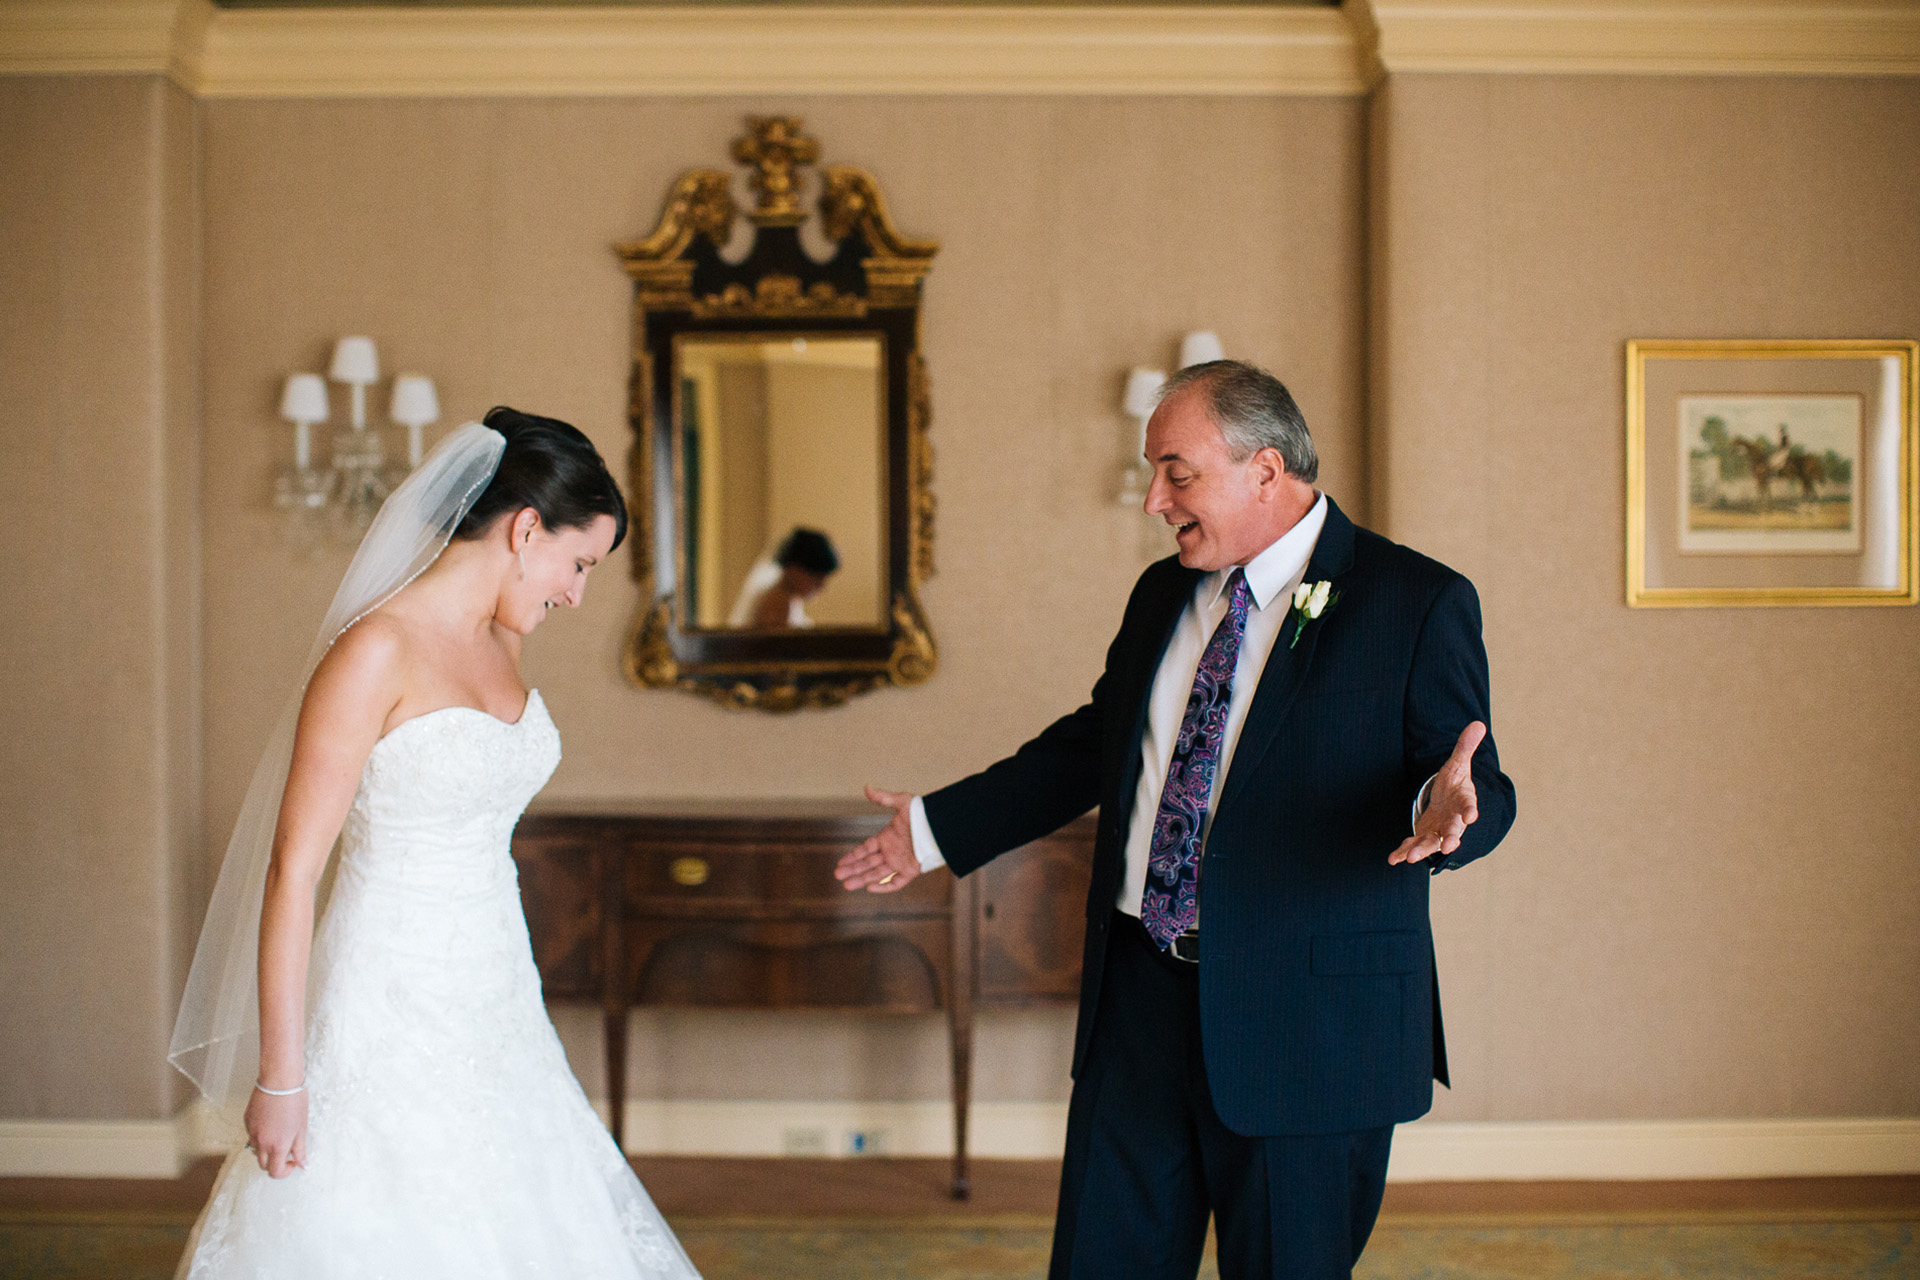 Cleveland Wedding at the Ritz Carlton Hotel - Too Much Awesomeness Photographer 11.jpg